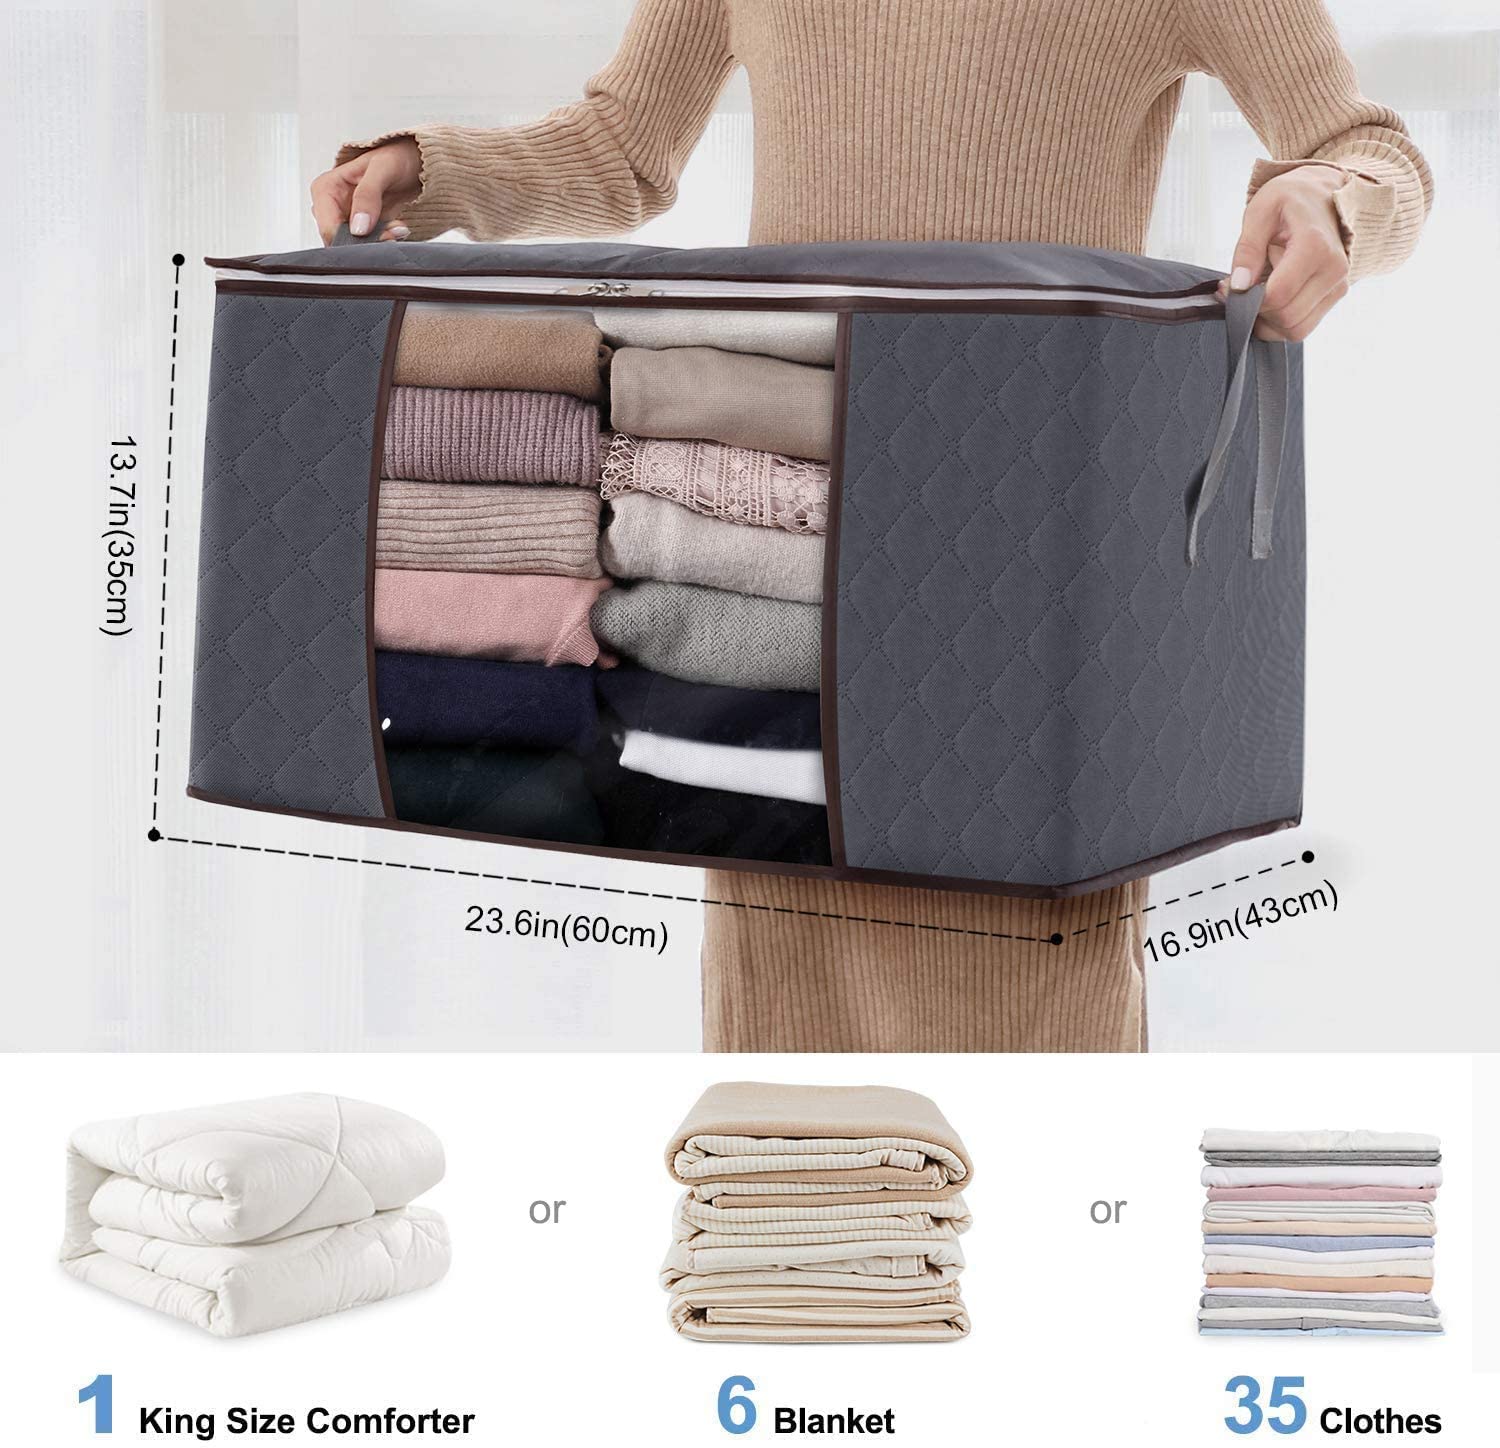 Lifewit-Large-Capacity-Clothes-Storage-Bag-1 Home Organization Hacks, Ideas, and Tips from Lifewit